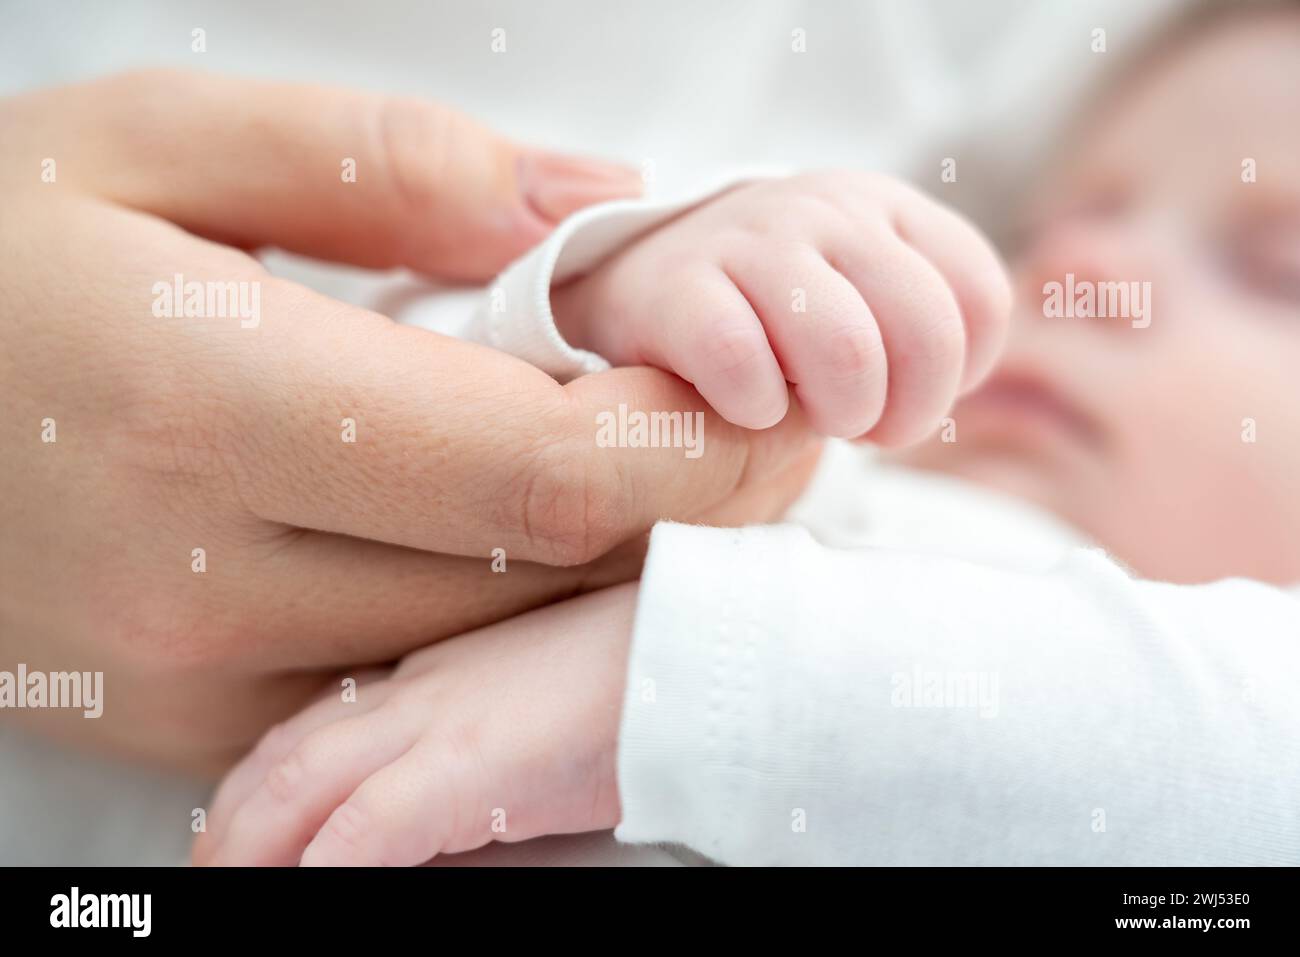 Innocence and trust showcased in baby's grip on mother. Concept of the sacred bond from birth Stock Photo